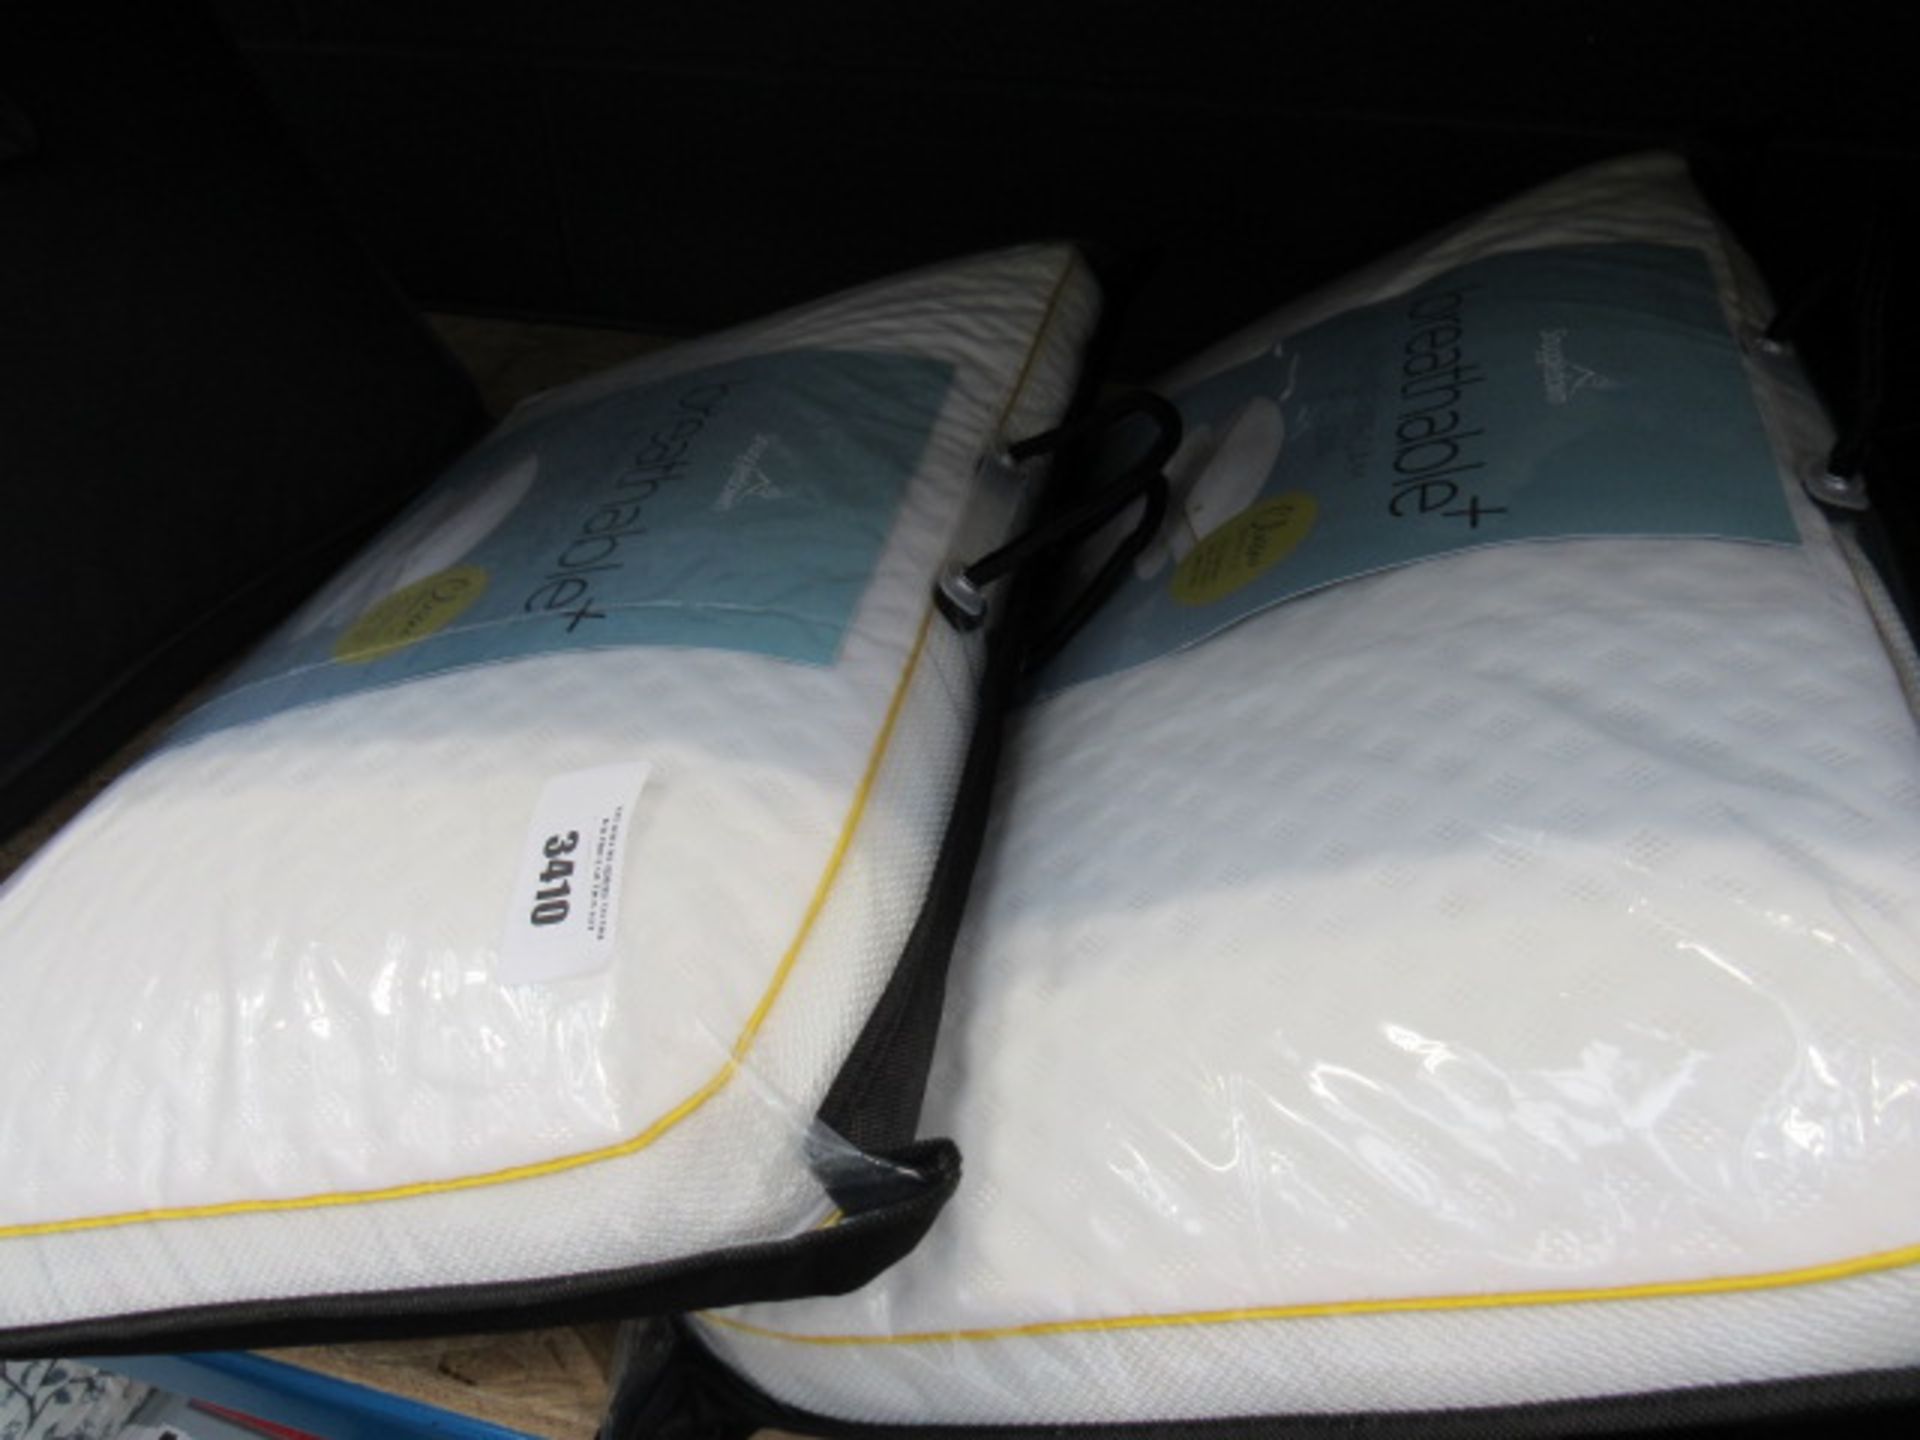 Two memory foam breathable pillows